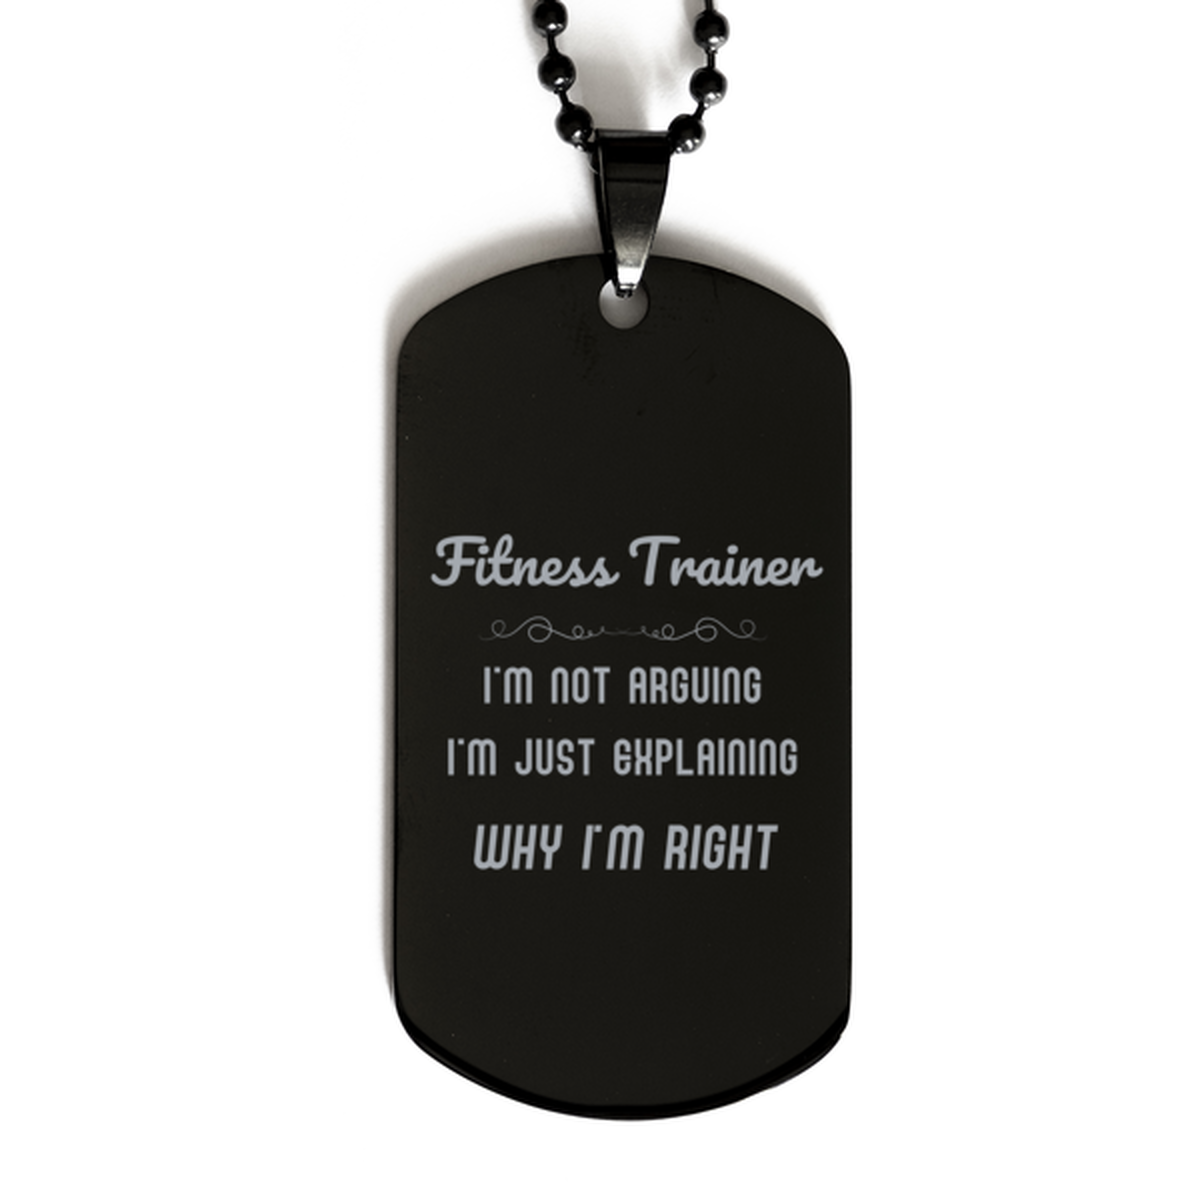 Fitness Trainer I'm not Arguing. I'm Just Explaining Why I'm RIGHT Black Dog Tag, Funny Saying Quote Fitness Trainer Gifts For Fitness Trainer Graduation Birthday Christmas Gifts for Men Women Coworker